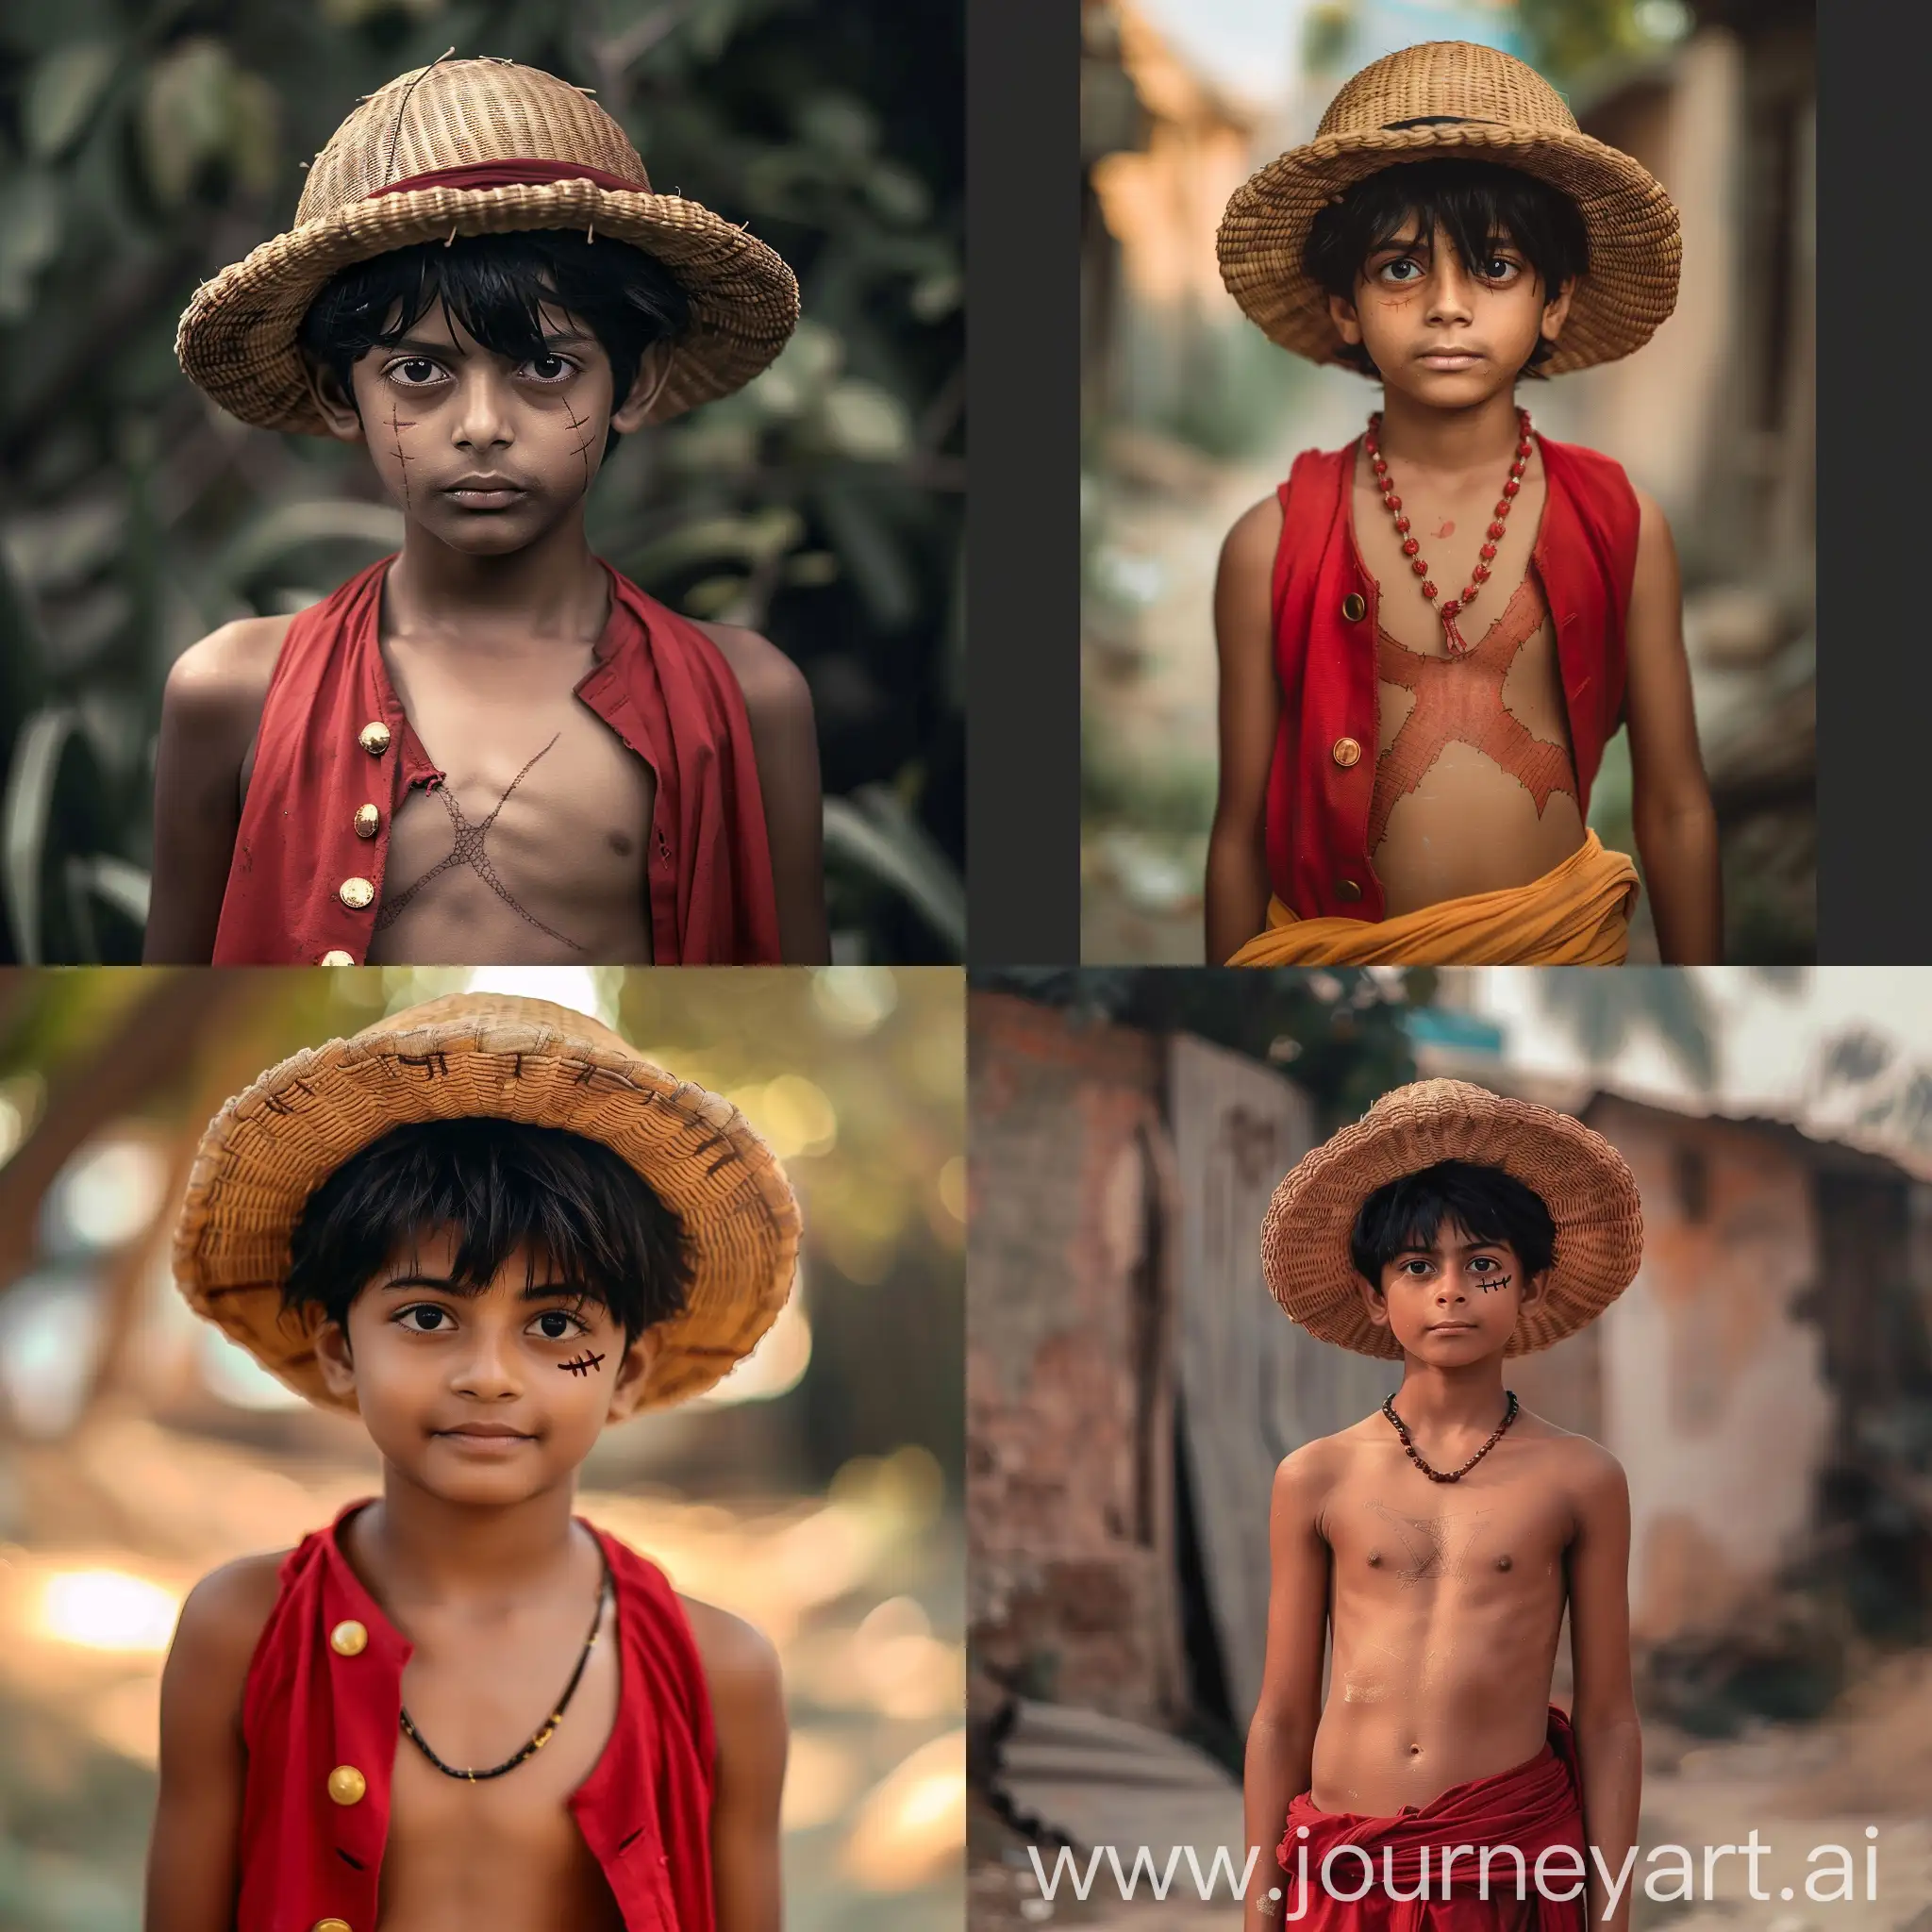 Realistic-Indian-Boy-Cosplaying-as-Monkey-D-Luffy